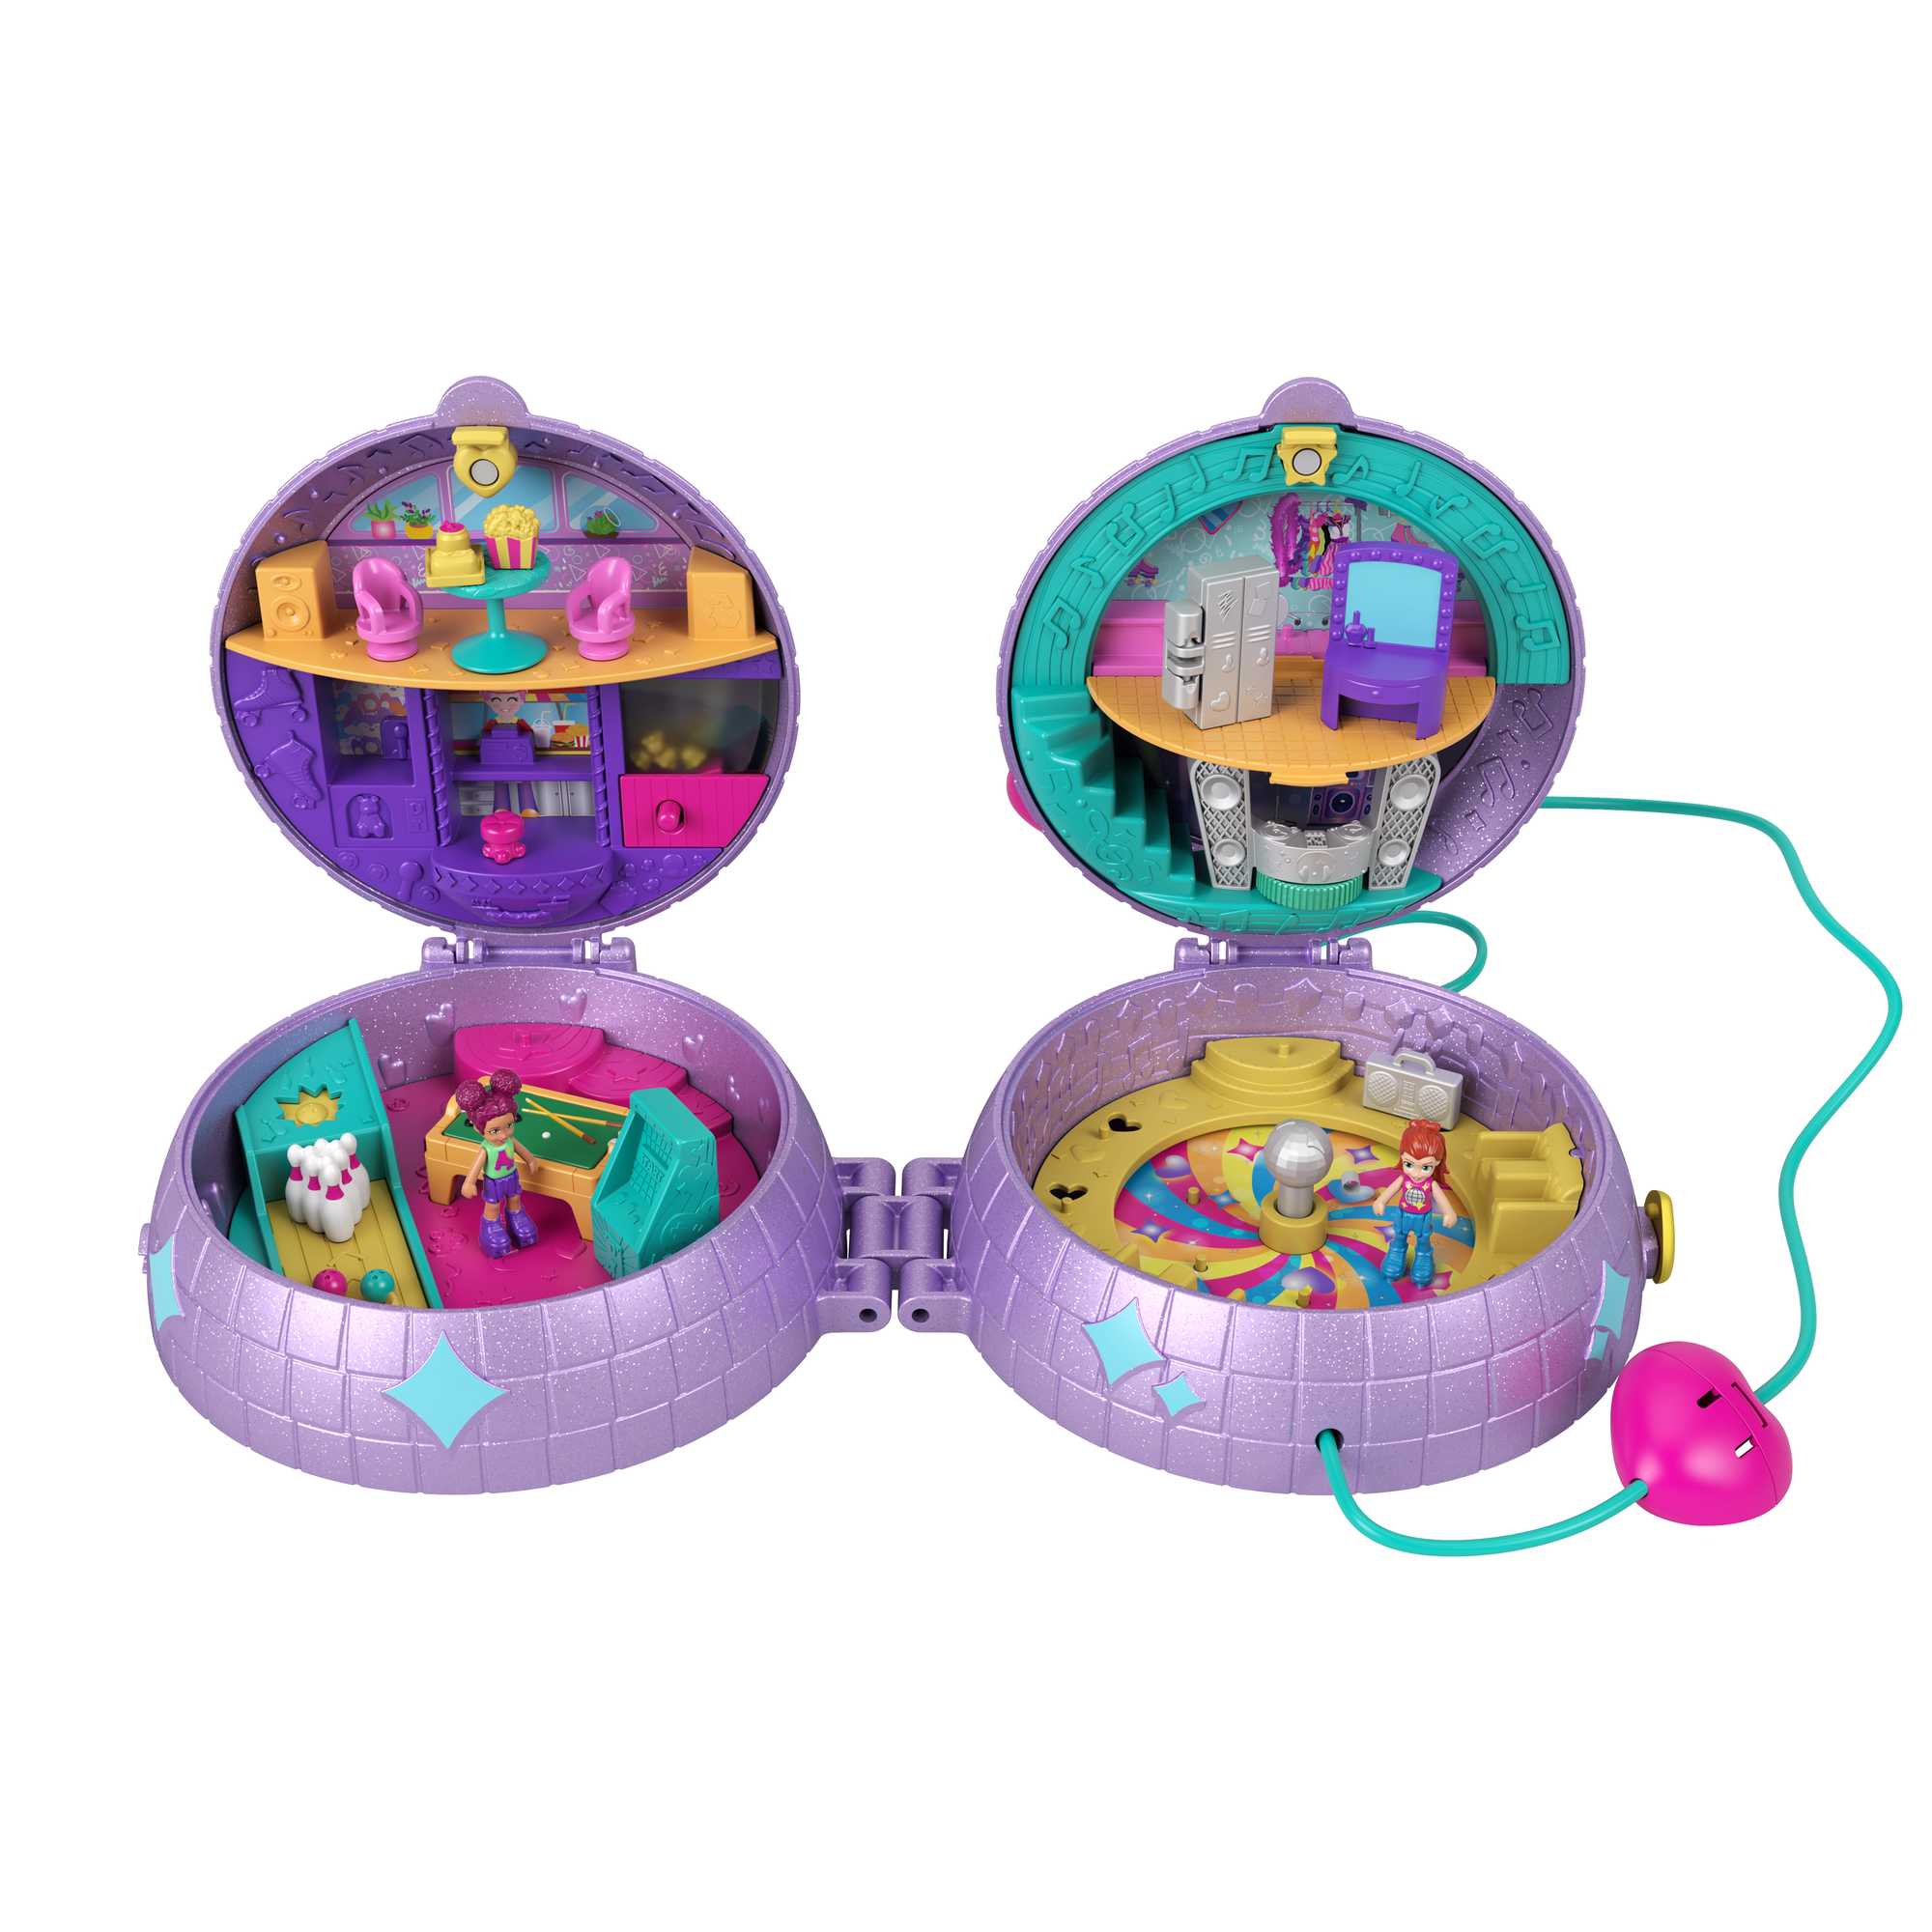 Polly Pocket Flip & Find Cat Compact, Travel Toy with Micro Polly Doll &  Pet Cat